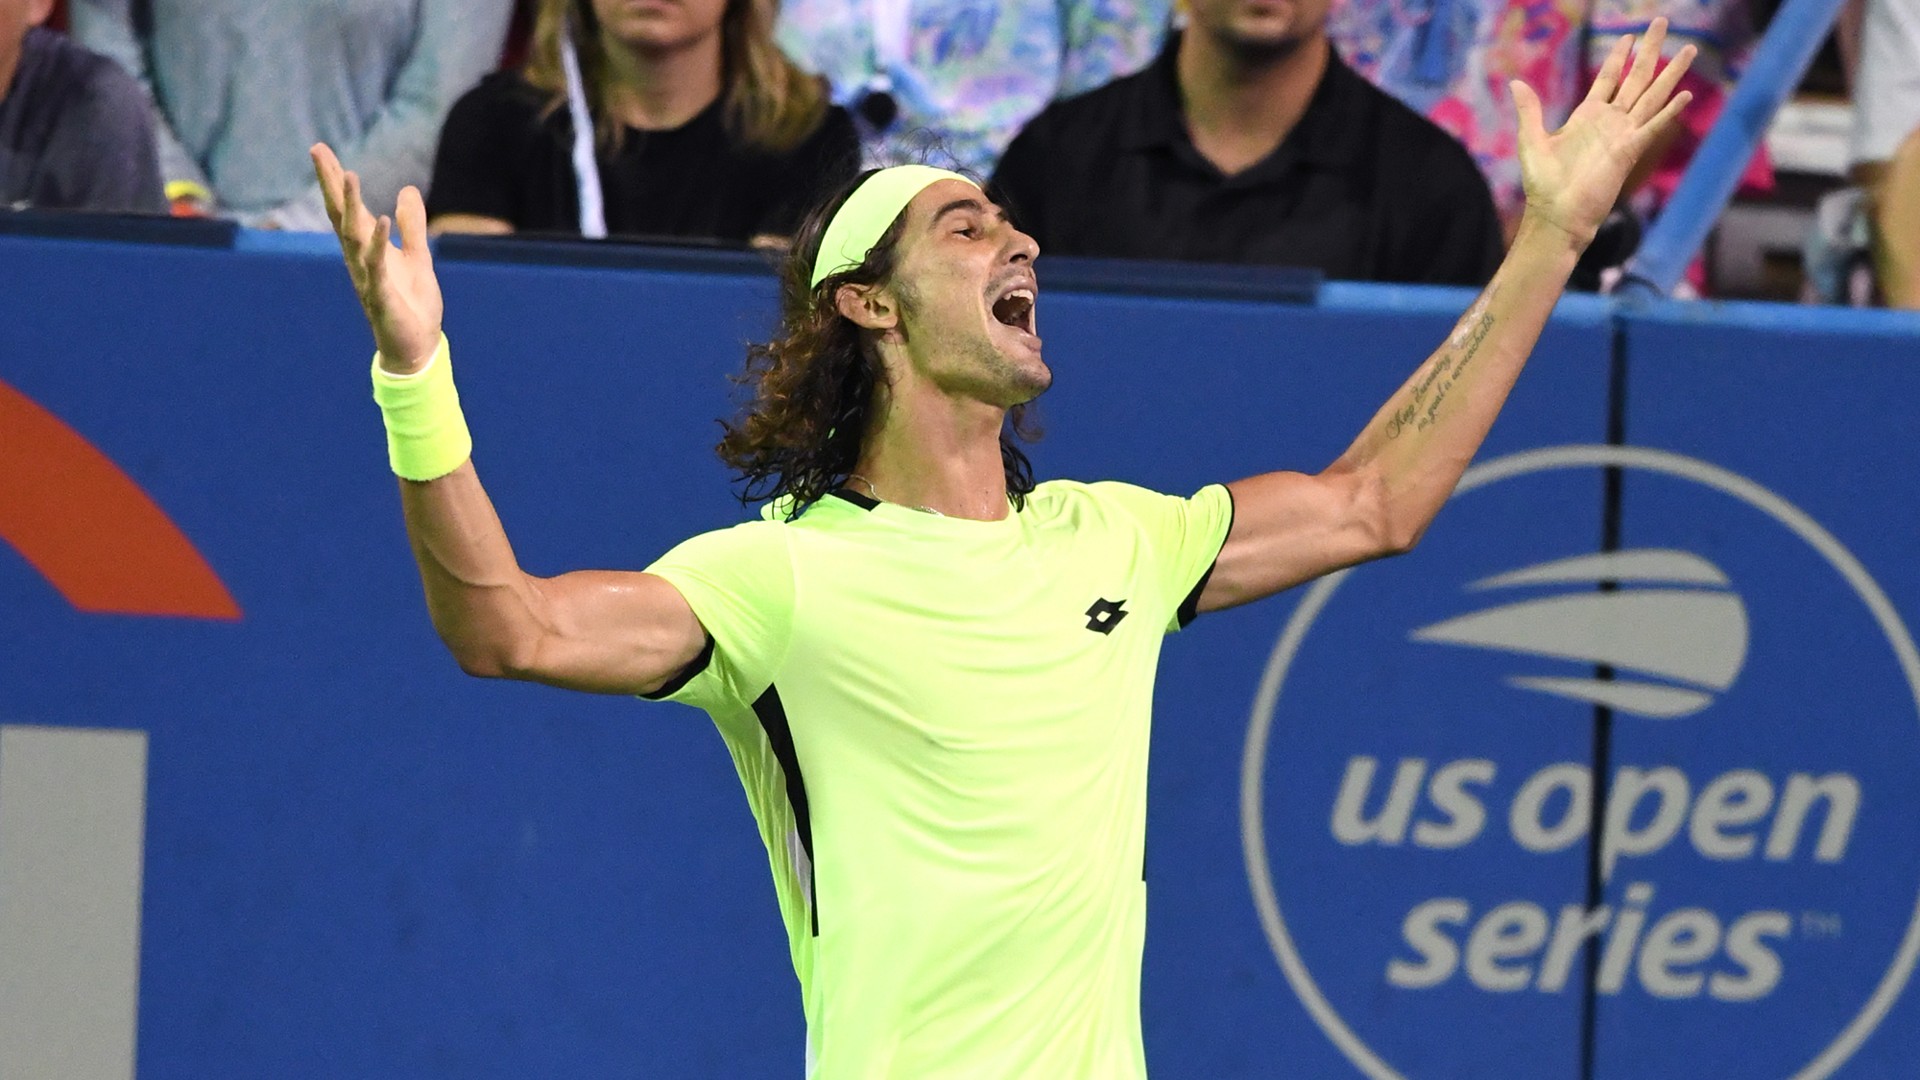 Nadal falls at Citi Open as seeds keep droppin beIN SPORTS